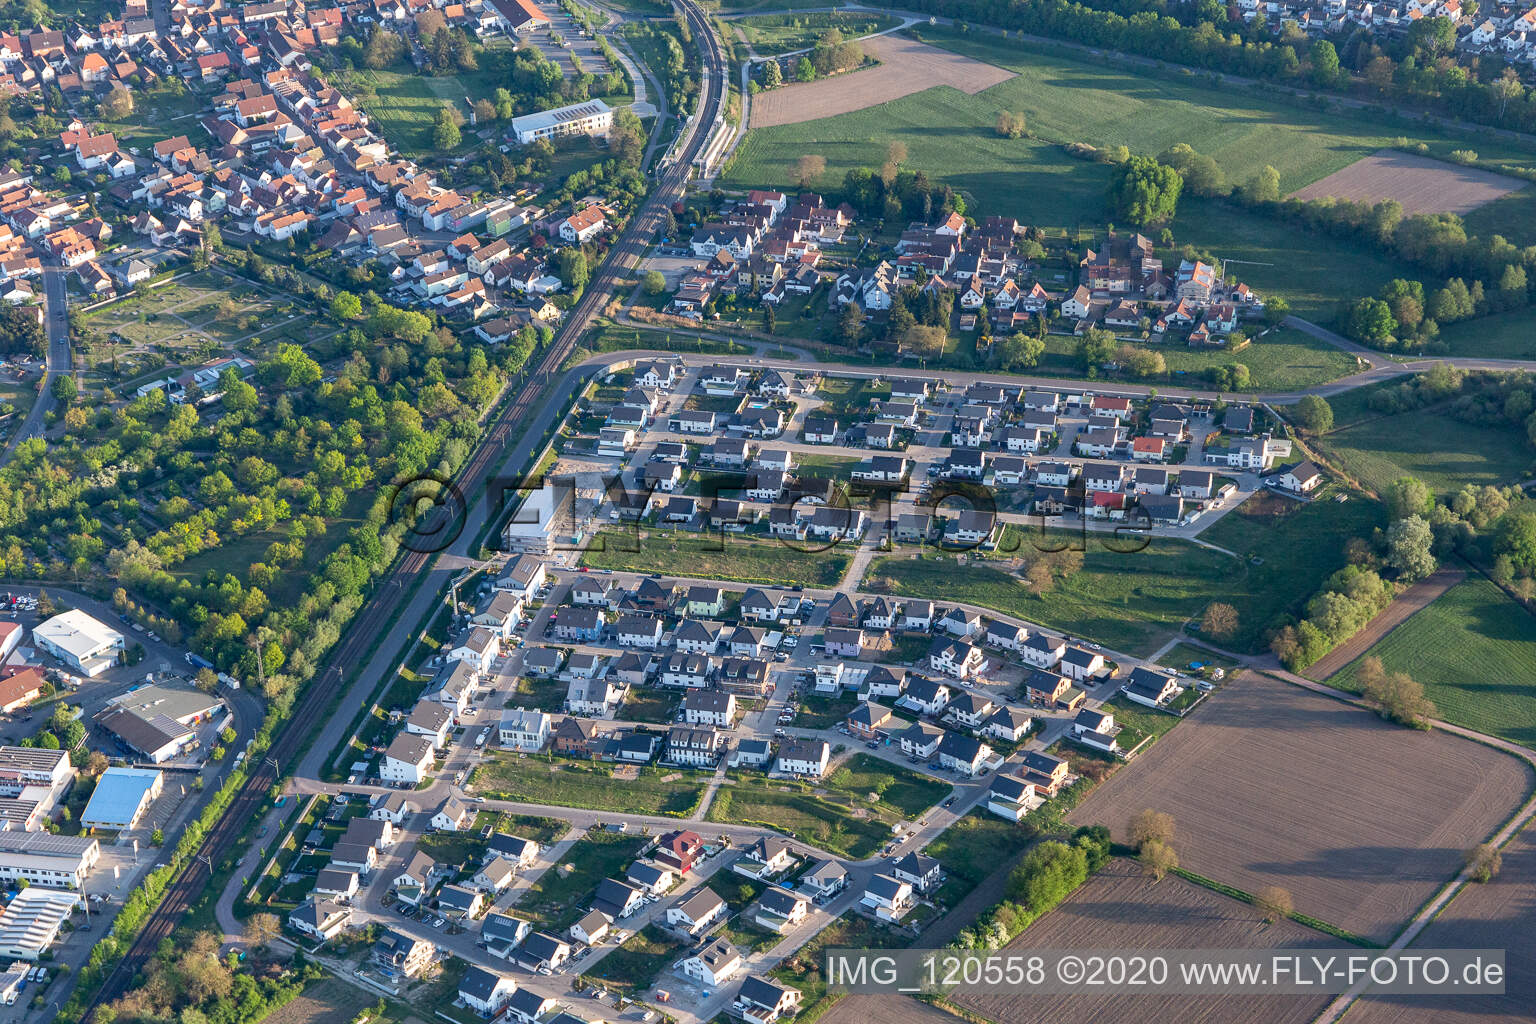 Aerial view of Paul-Klee-Ring new development area in Wörth am Rhein in the state Rhineland-Palatinate, Germany